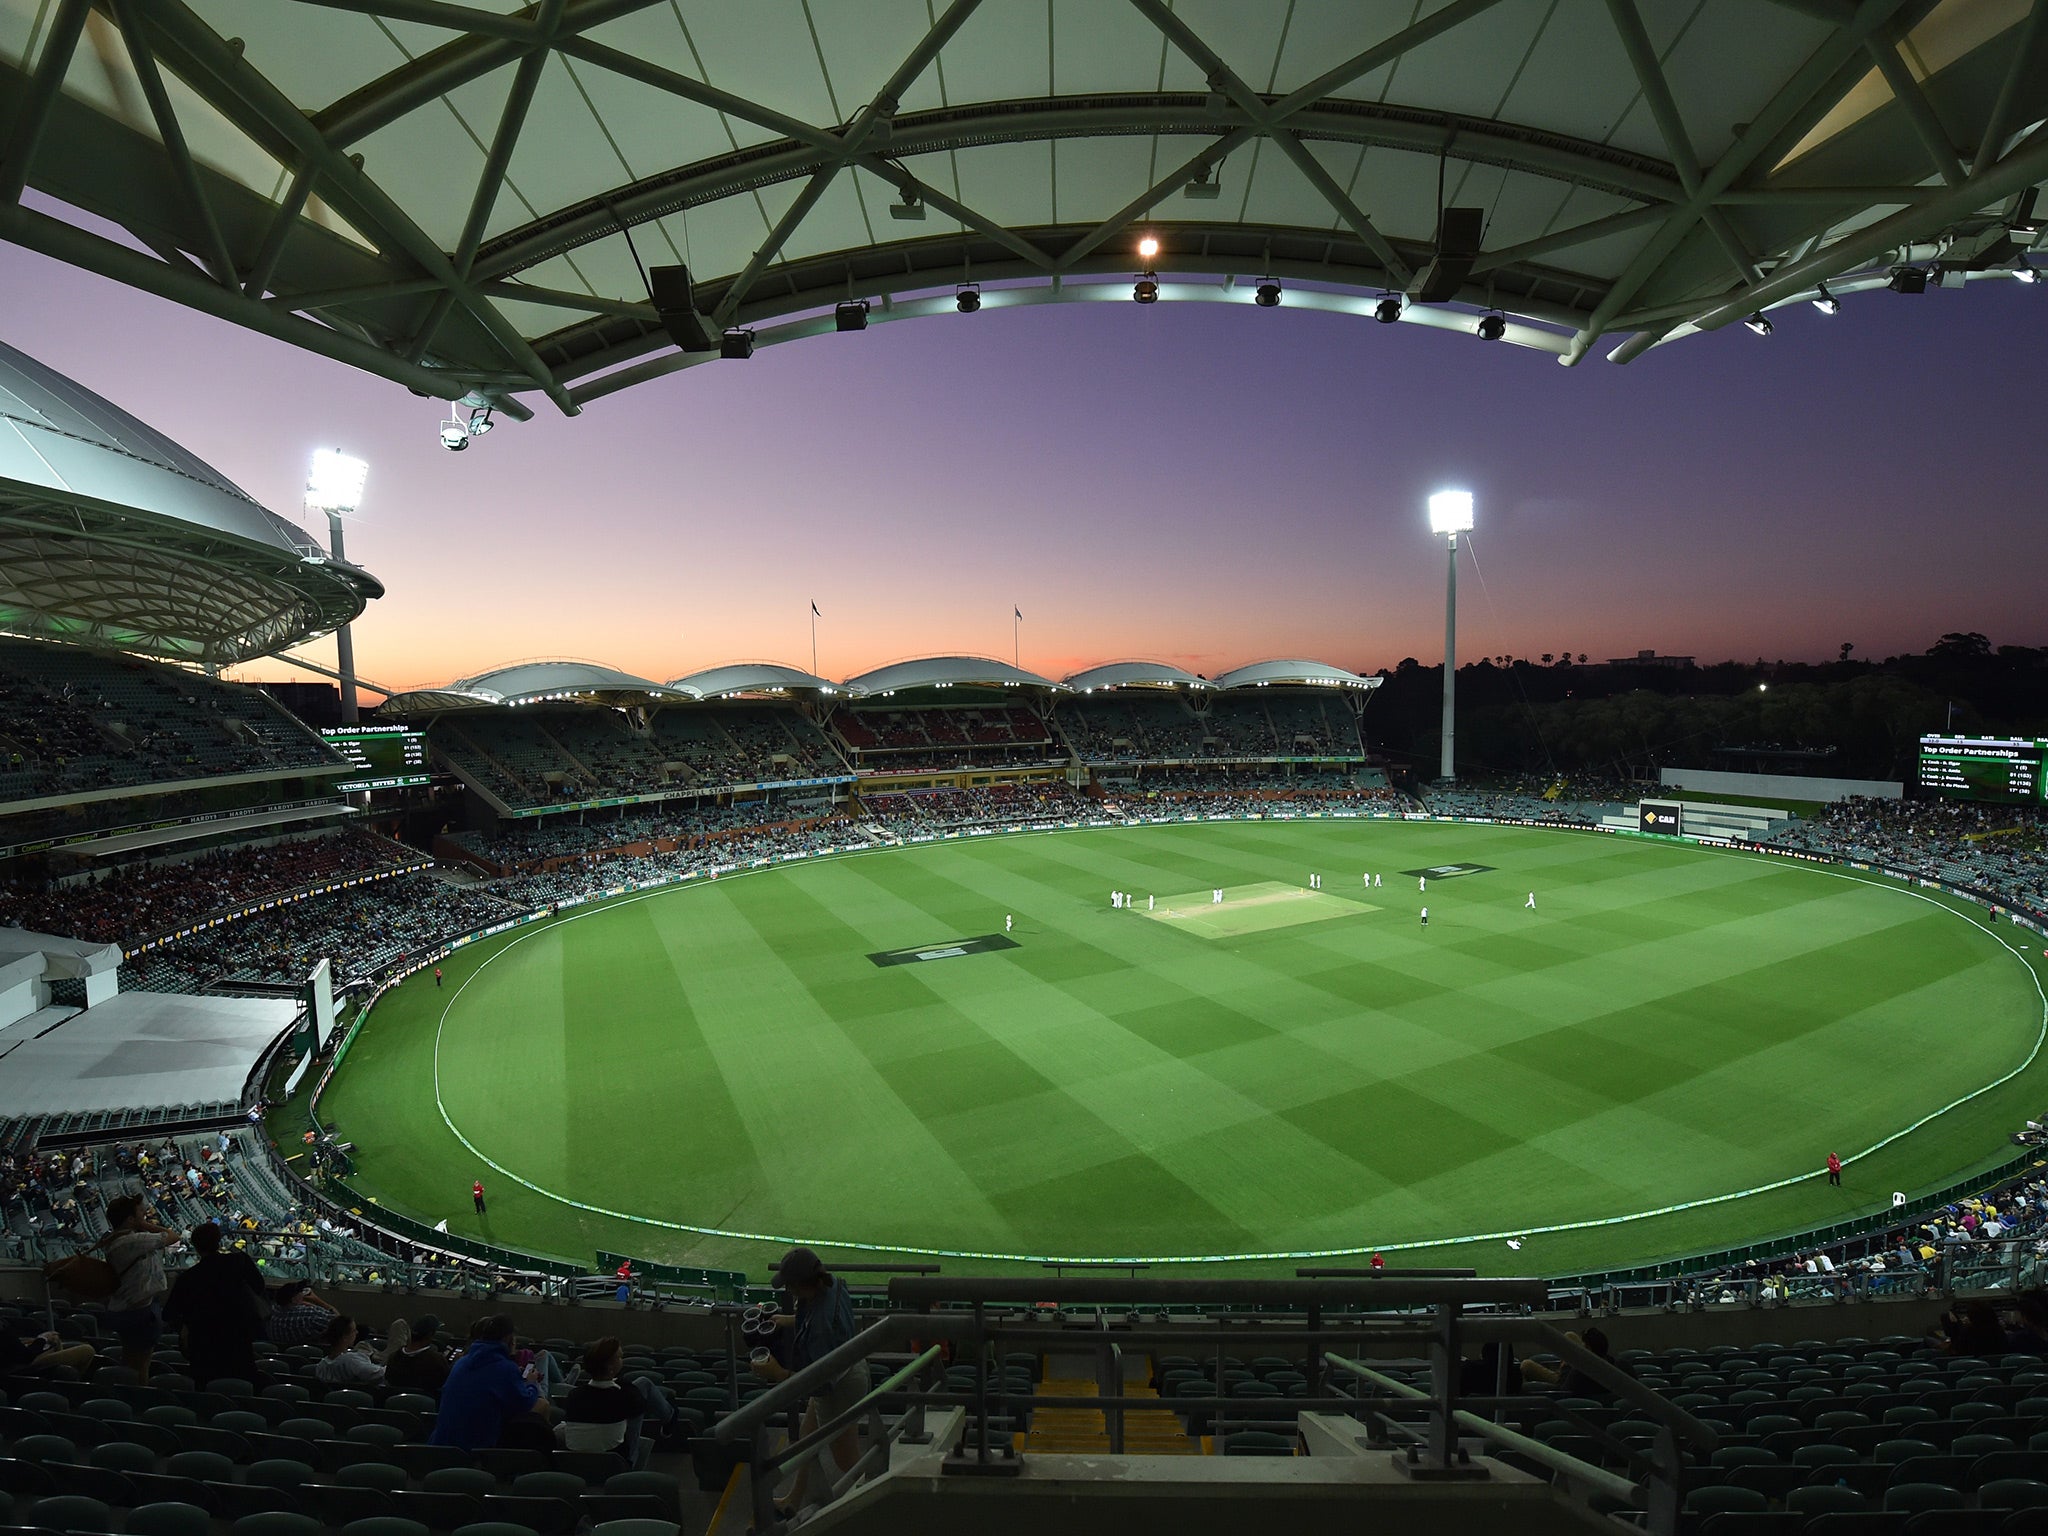 The Adelaide Oval held a day-night Test between Australia and South Africa last month